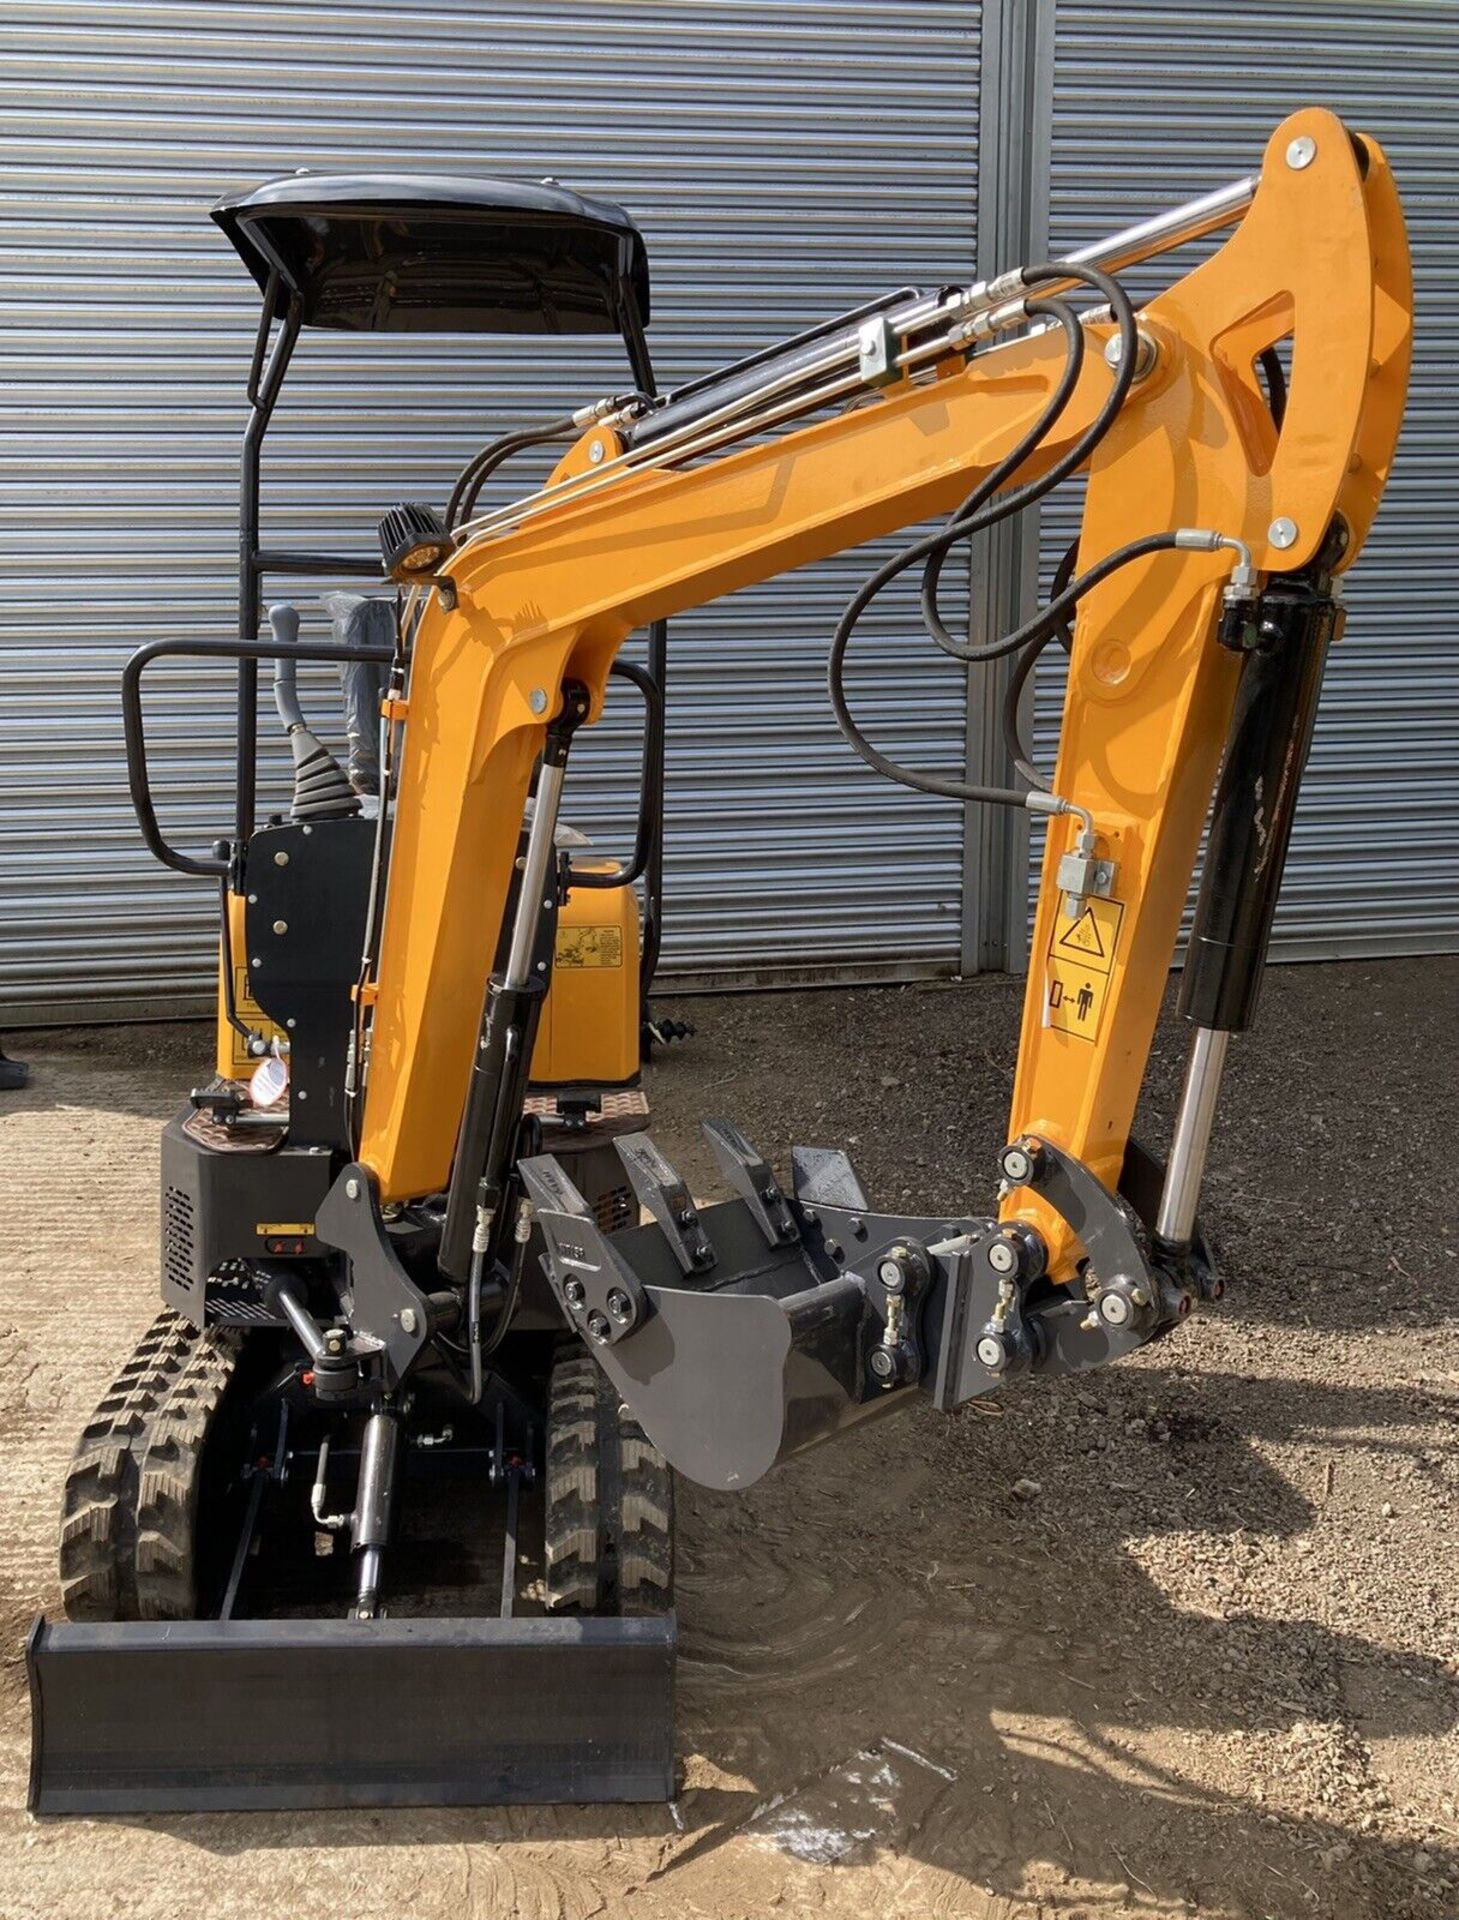 2023 POWER UNLEASHED: BRAND NEW 1 TONNE MICRO DIGGER - JCB, KUBOTA, AND MORE! - Image 6 of 12